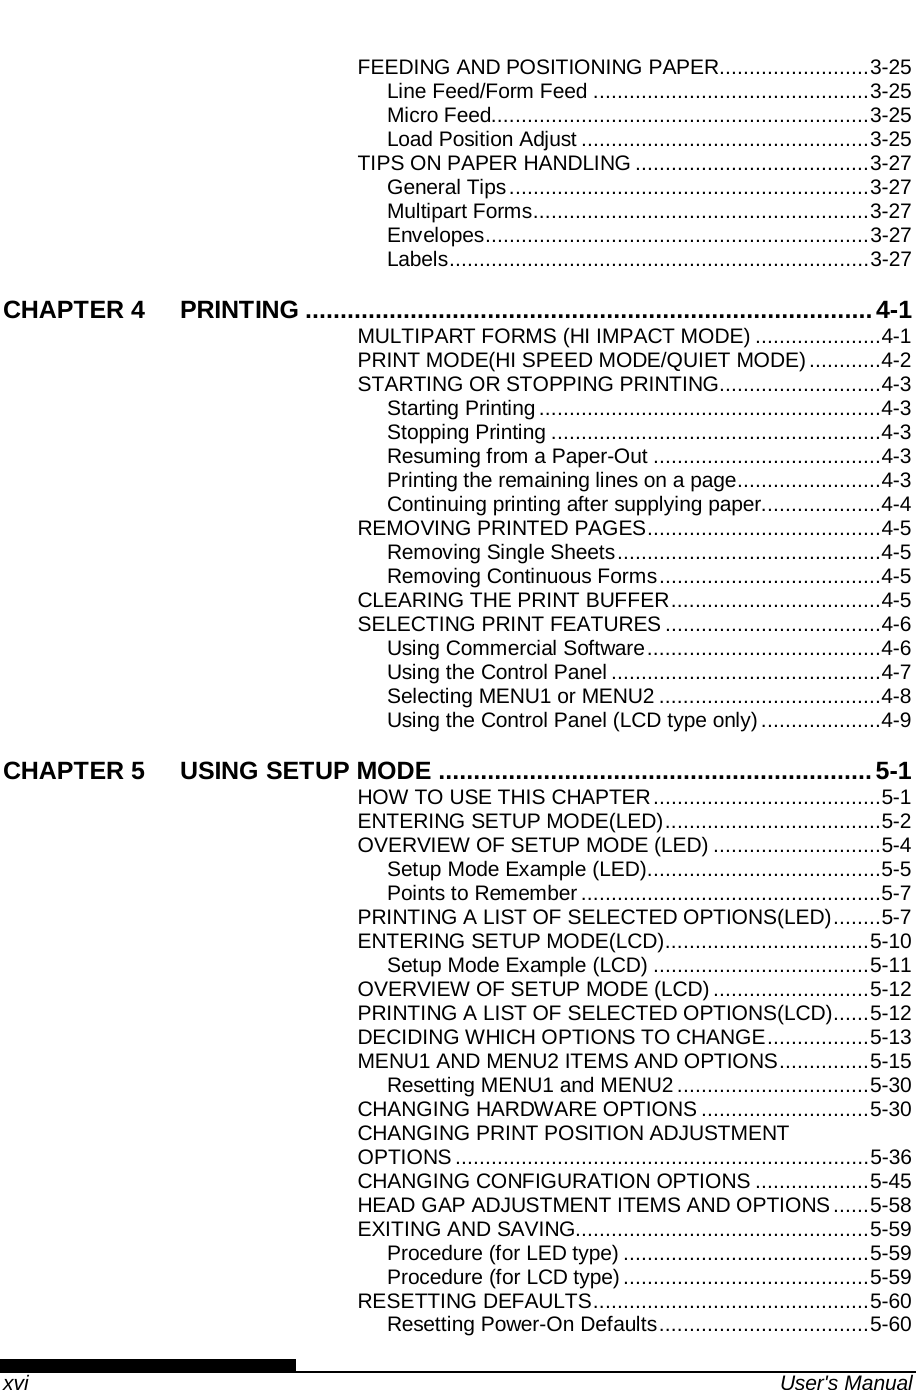    xvi  User&apos;s Manual FEEDING AND POSITIONING PAPER ......................... 3-25 Line Feed/Form Feed .............................................. 3-25 Micro Feed............................................................... 3-25 Load Position Adjust ................................................ 3-25 TIPS ON PAPER HANDLING ....................................... 3-27 General Tips ............................................................ 3-27 Multipart Forms ........................................................ 3-27 Envelopes ................................................................ 3-27 Labels ...................................................................... 3-27 CHAPTER 4 PRINTING ................................................................................. 4-1 MULTIPART FORMS (HI IMPACT MODE) ..................... 4-1 PRINT MODE(HI SPEED MODE/QUIET MODE) ............ 4-2 STARTING OR STOPPING PRINTING ........................... 4-3 Starting Printing ......................................................... 4-3 Stopping Printing ....................................................... 4-3 Resuming from a Paper-Out ...................................... 4-3 Printing the remaining lines on a page ........................ 4-3 Continuing printing after supplying paper.................... 4-4 REMOVING PRINTED PAGES ....................................... 4-5 Removing Single Sheets ............................................ 4-5 Removing Continuous Forms ..................................... 4-5 CLEARING THE PRINT BUFFER ................................... 4-5 SELECTING PRINT FEATURES .................................... 4-6 Using Commercial Software ....................................... 4-6 Using the Control Panel ............................................. 4-7 Selecting MENU1 or MENU2 ..................................... 4-8 Using the Control Panel (LCD type only) .................... 4-9 CHAPTER 5 USING SETUP MODE .............................................................. 5-1 HOW TO USE THIS CHAPTER ...................................... 5-1 ENTERING SETUP MODE(LED) .................................... 5-2 OVERVIEW OF SETUP MODE (LED) ............................ 5-4 Setup Mode Example (LED) ....................................... 5-5 Points to Remember .................................................. 5-7 PRINTING A LIST OF SELECTED OPTIONS(LED) ........ 5-7 ENTERING SETUP MODE(LCD) .................................. 5-10 Setup Mode Example (LCD) .................................... 5-11 OVERVIEW OF SETUP MODE (LCD) .......................... 5-12 PRINTING A LIST OF SELECTED OPTIONS(LCD) ...... 5-12 DECIDING WHICH OPTIONS TO CHANGE ................. 5-13 MENU1 AND MENU2 ITEMS AND OPTIONS ............... 5-15 Resetting MENU1 and MENU2 ................................ 5-30 CHANGING HARDWARE OPTIONS ............................ 5-30 CHANGING PRINT POSITION ADJUSTMENT OPTIONS ..................................................................... 5-36 CHANGING CONFIGURATION OPTIONS ................... 5-45 HEAD GAP ADJUSTMENT ITEMS AND OPTIONS ...... 5-58 EXITING AND SAVING................................................. 5-59 Procedure (for LED type) ......................................... 5-59 Procedure (for LCD type) ......................................... 5-59 RESETTING DEFAULTS .............................................. 5-60 Resetting Power-On Defaults ................................... 5-60 